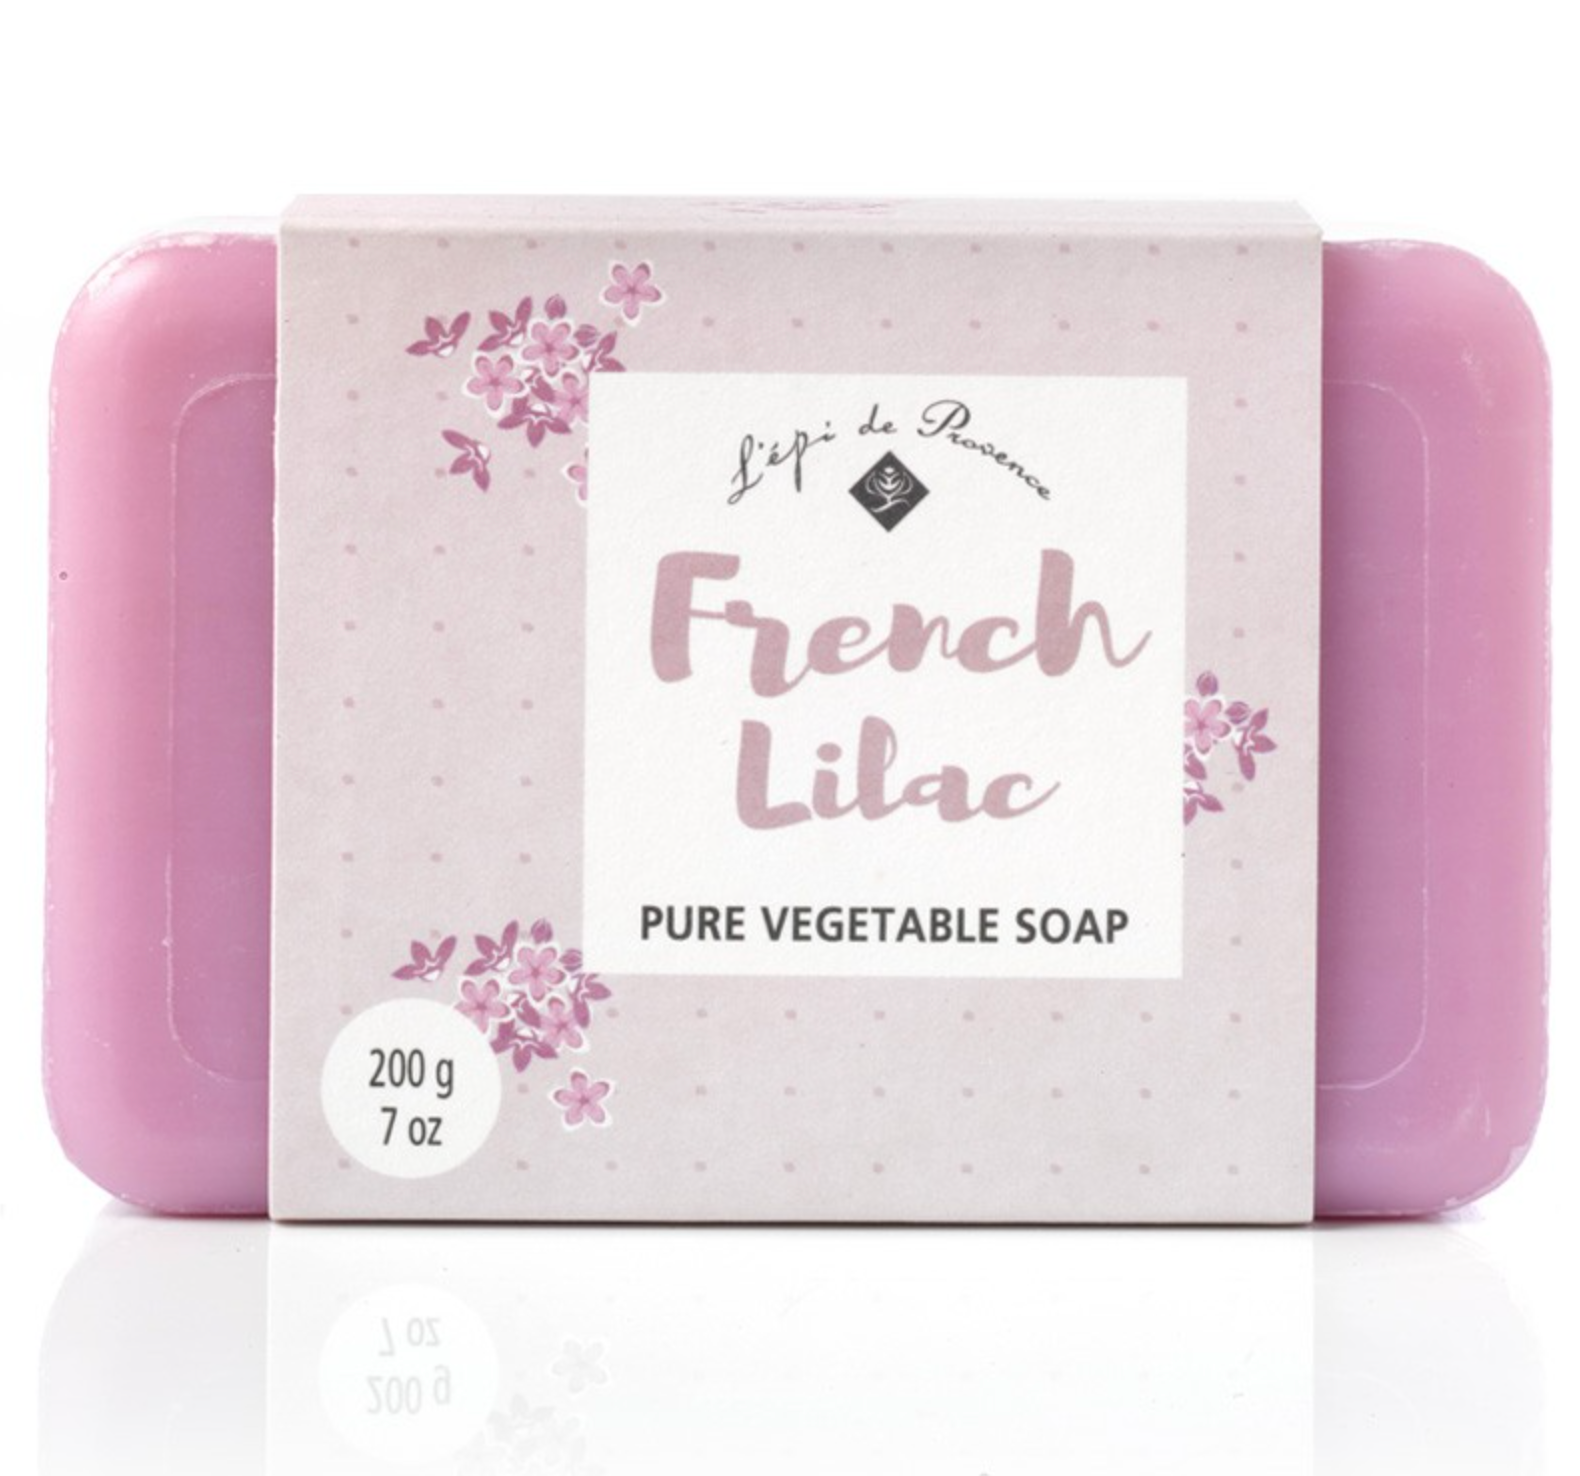 French Lilac Soap - Heart of the Home LV